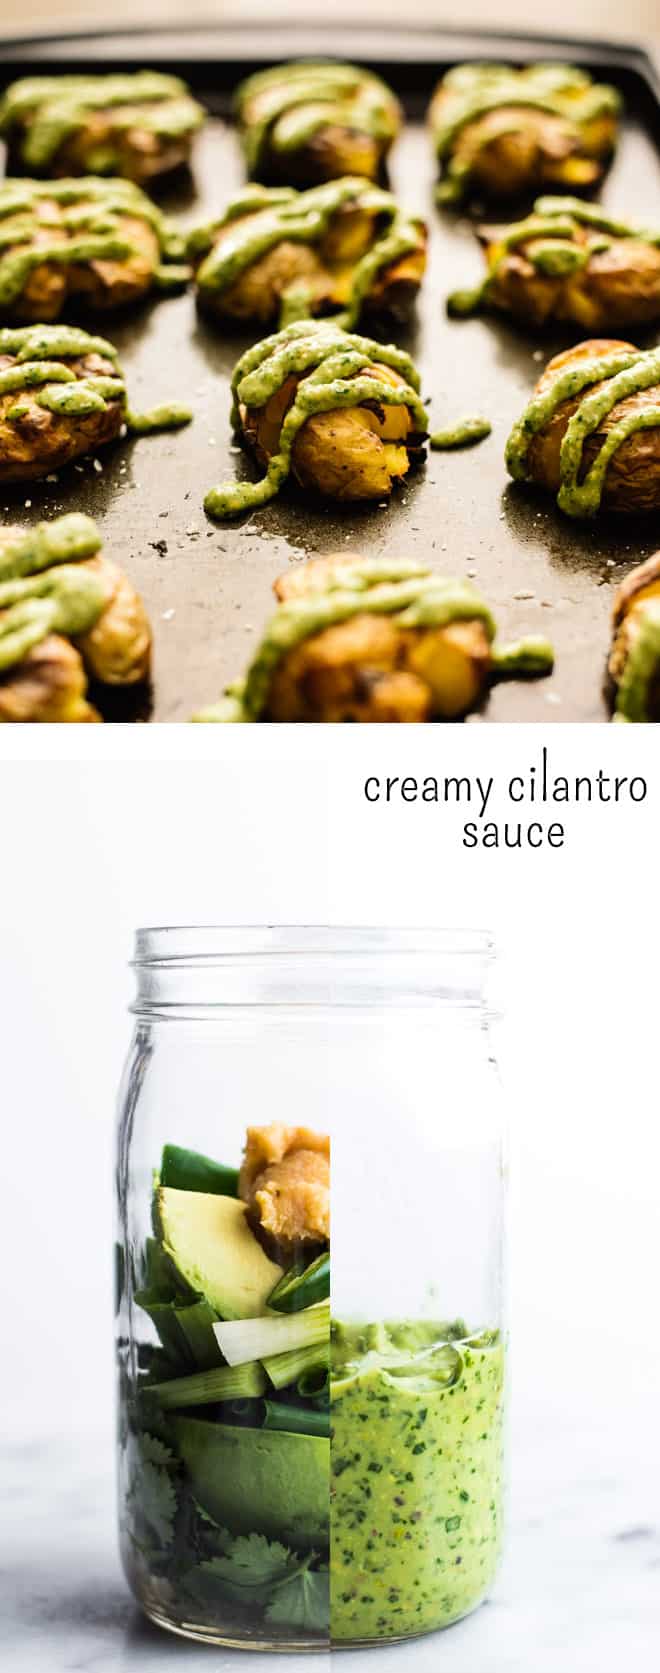 Versatile Creamy Cilantro Sauce - an easy, tasty sauce that only takes 5 minutes to make, and it goes well with everything! by Lisa Lin of healthynibblesandbits.com